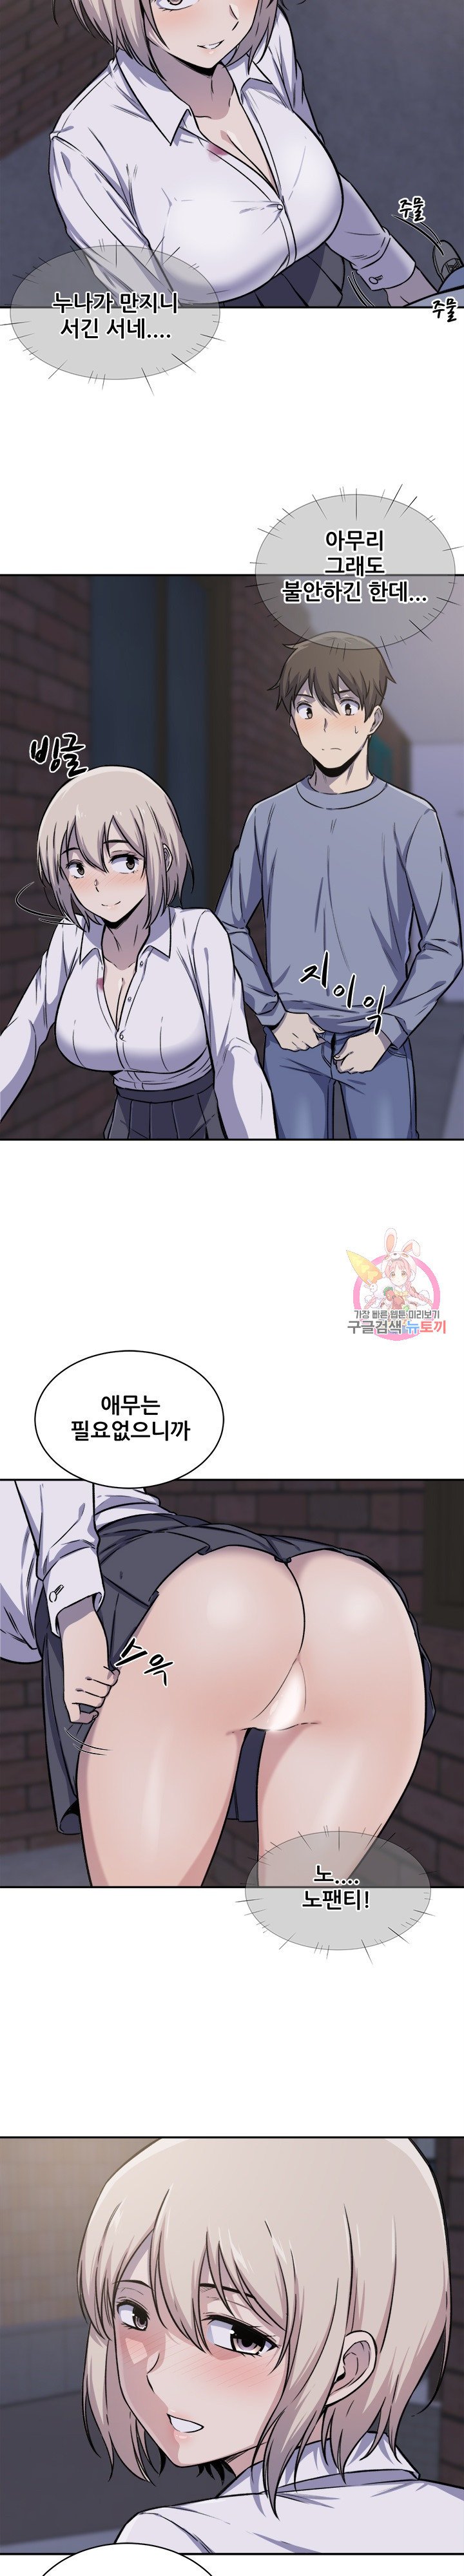 the-ark-is-me-raw-chap-30-17